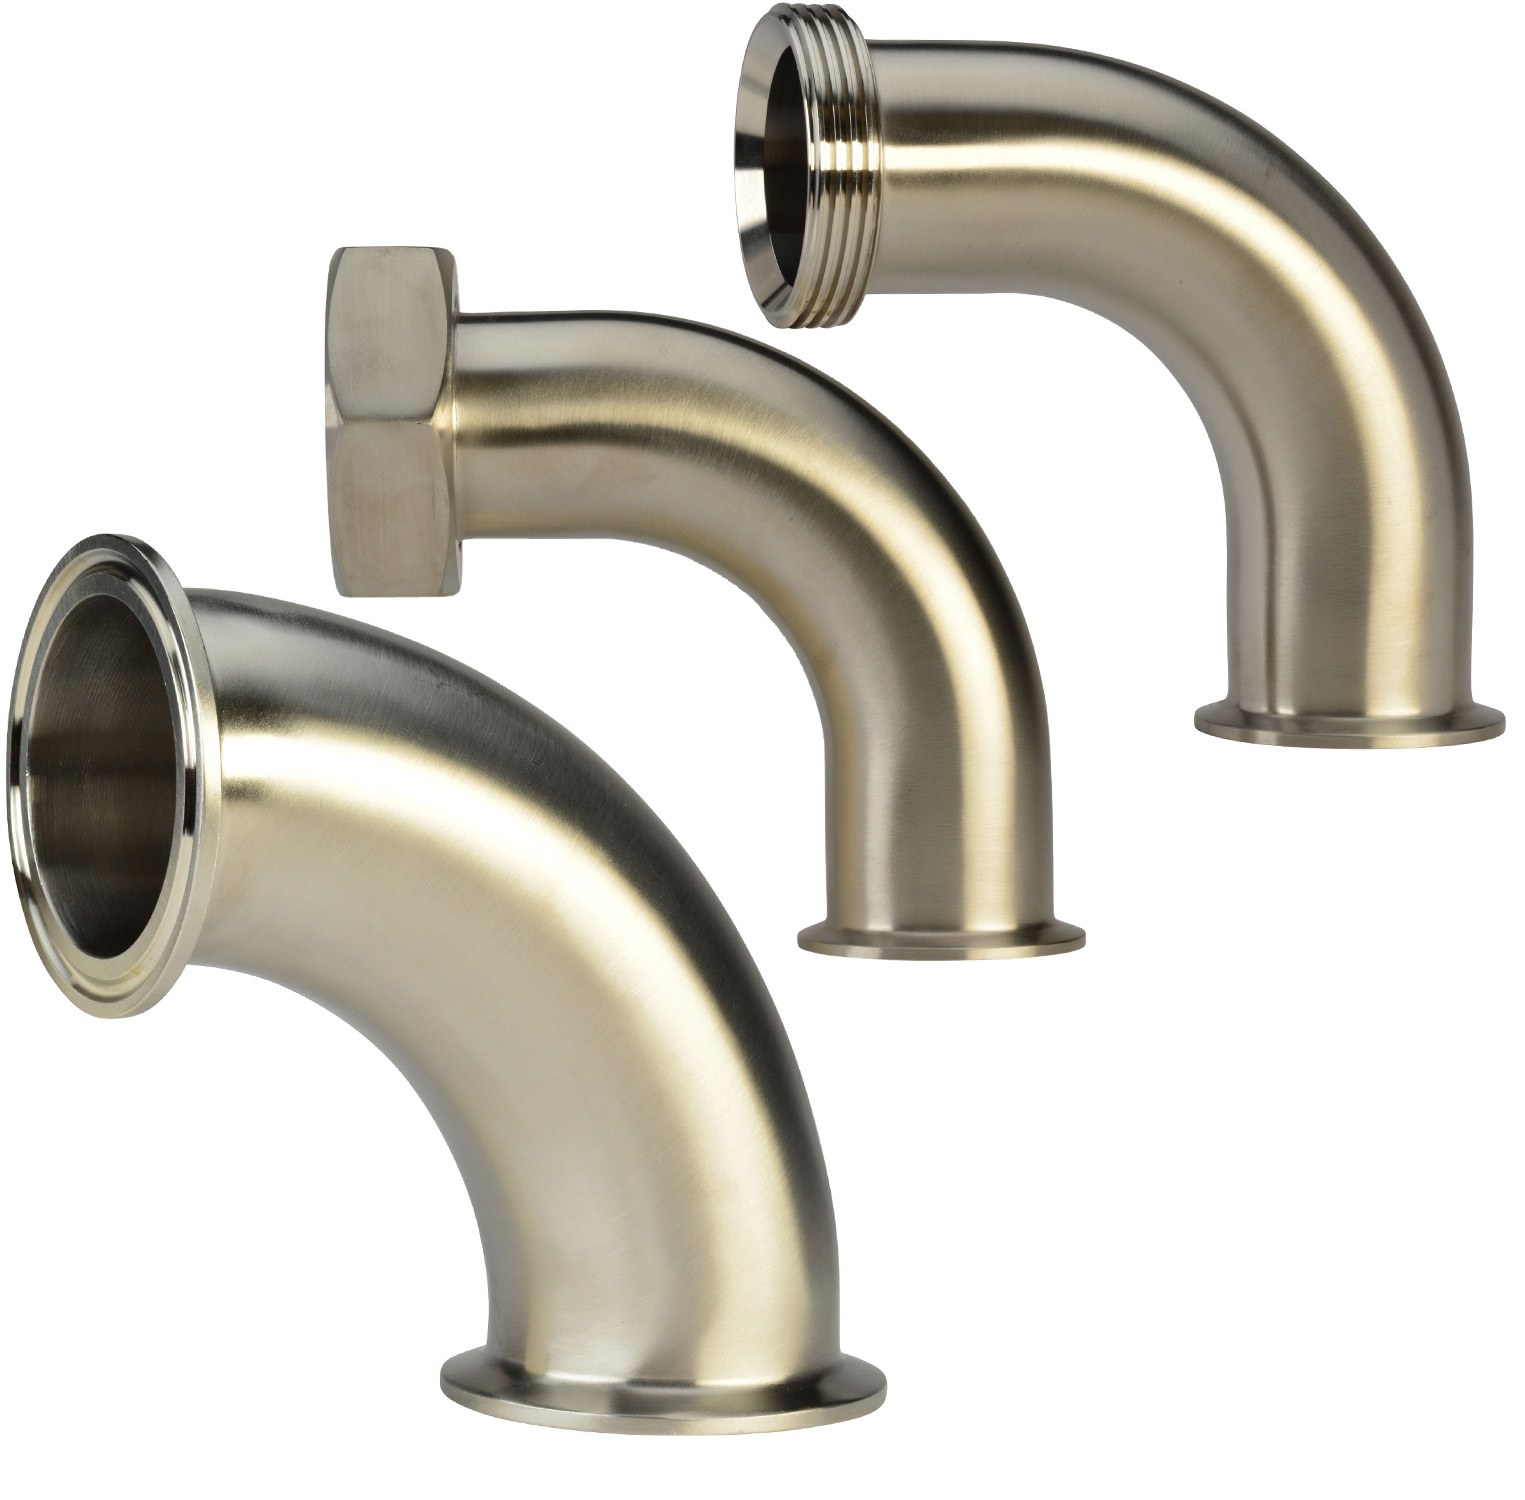 Stainless Steel 90 Degree Angles w/ 1" Sanitary Fittings 